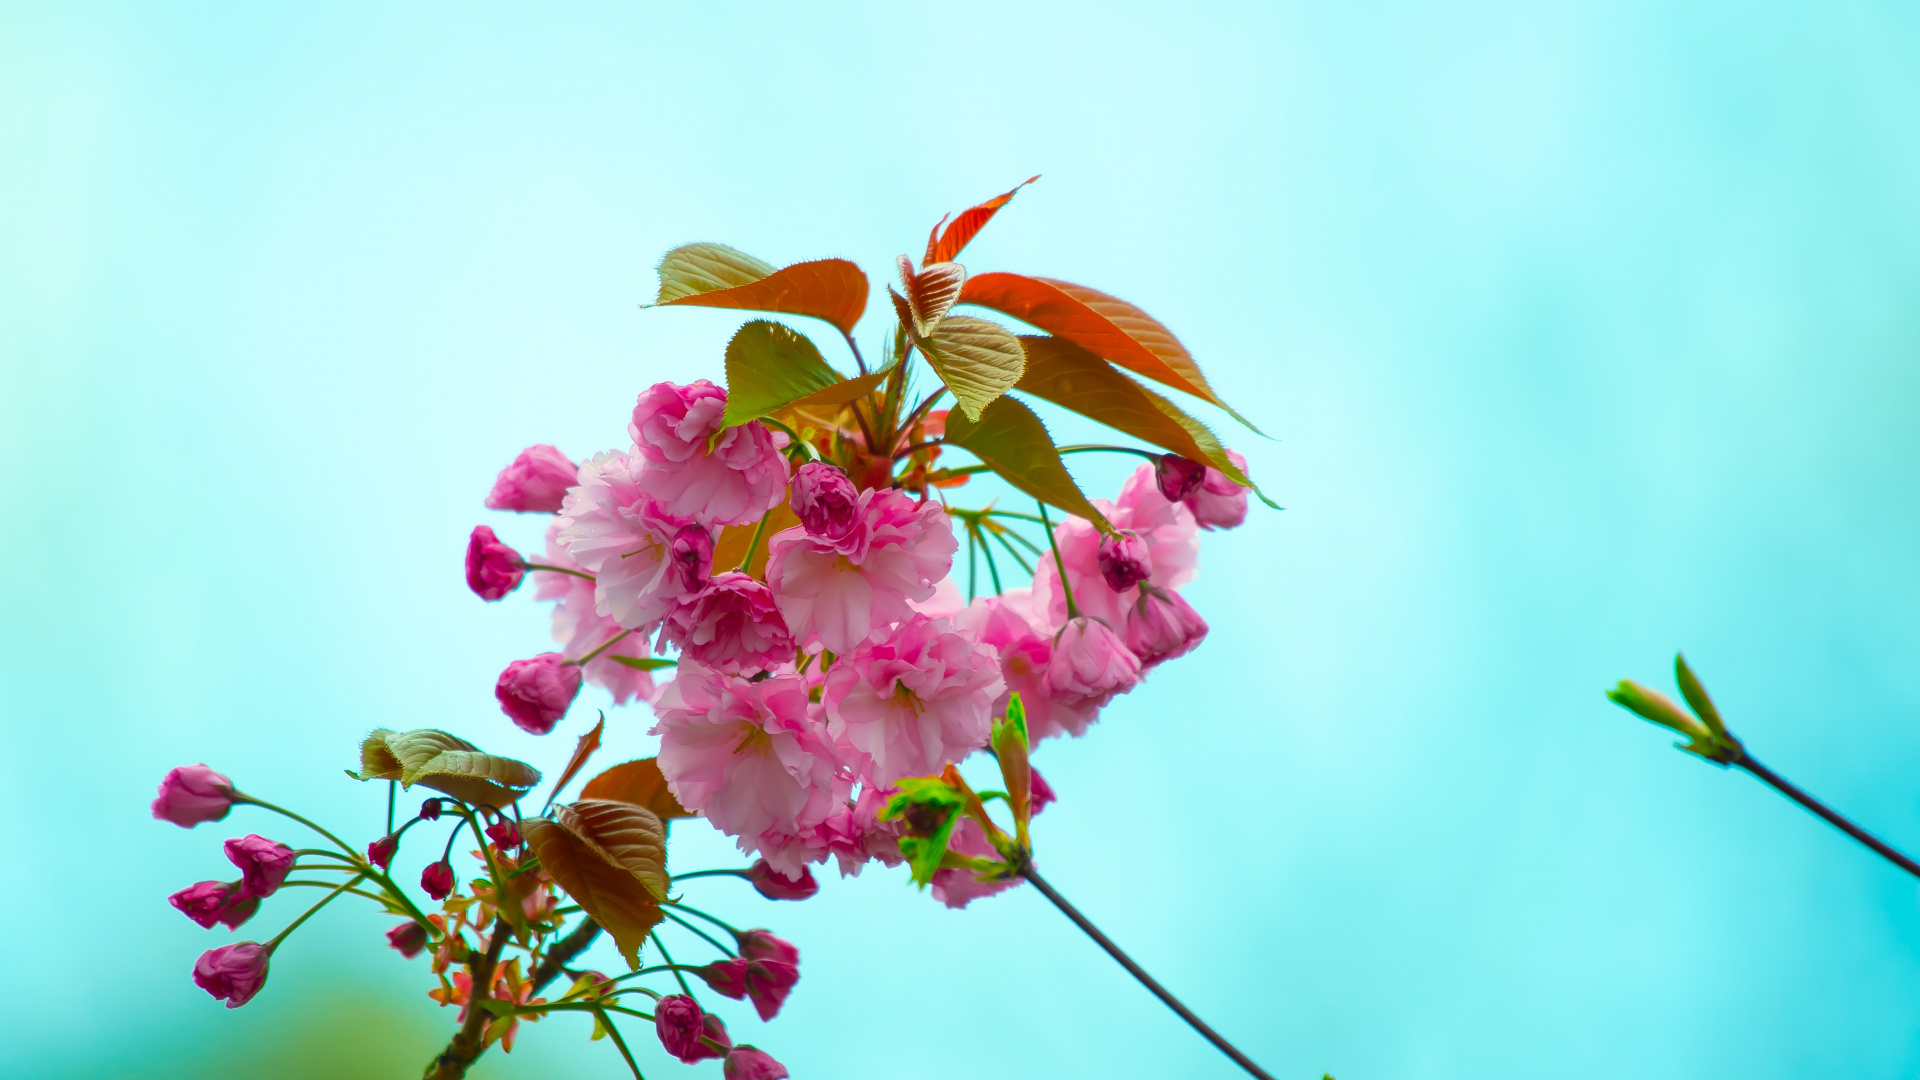 Pink Flower With Green Leaves. Wallpaper in 1920x1080 Resolution